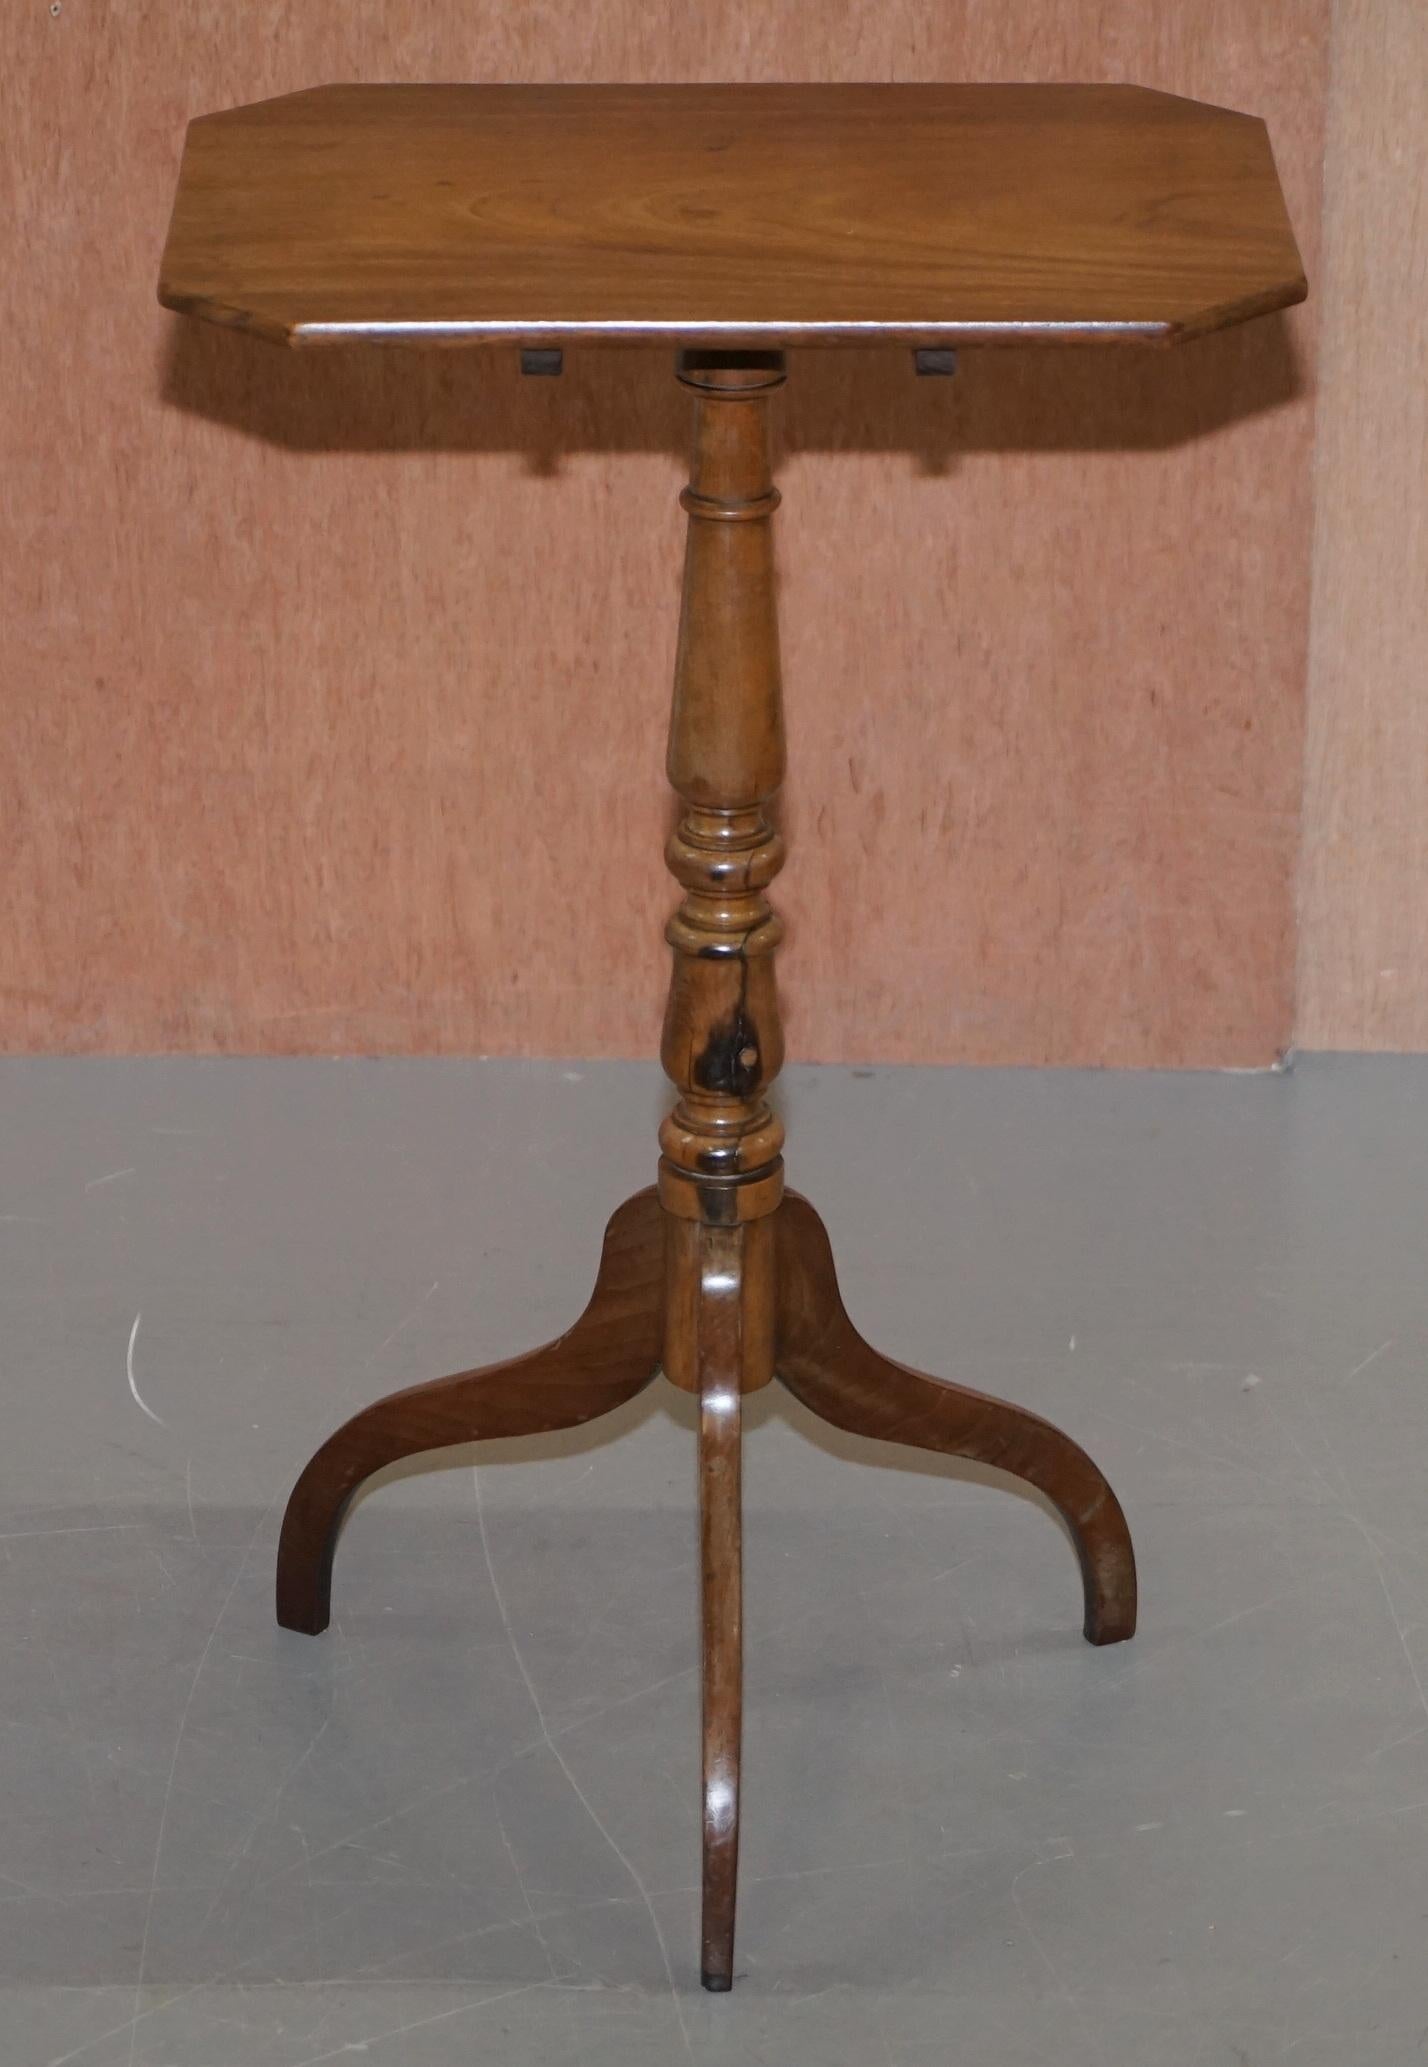 We are delighted to offer for sale this lovely Victorian walnut tripod table

A good looking well made and functional Victorian side table with the original patina. Its rectangle with shaved corners

In terms of the condition we have cleaned